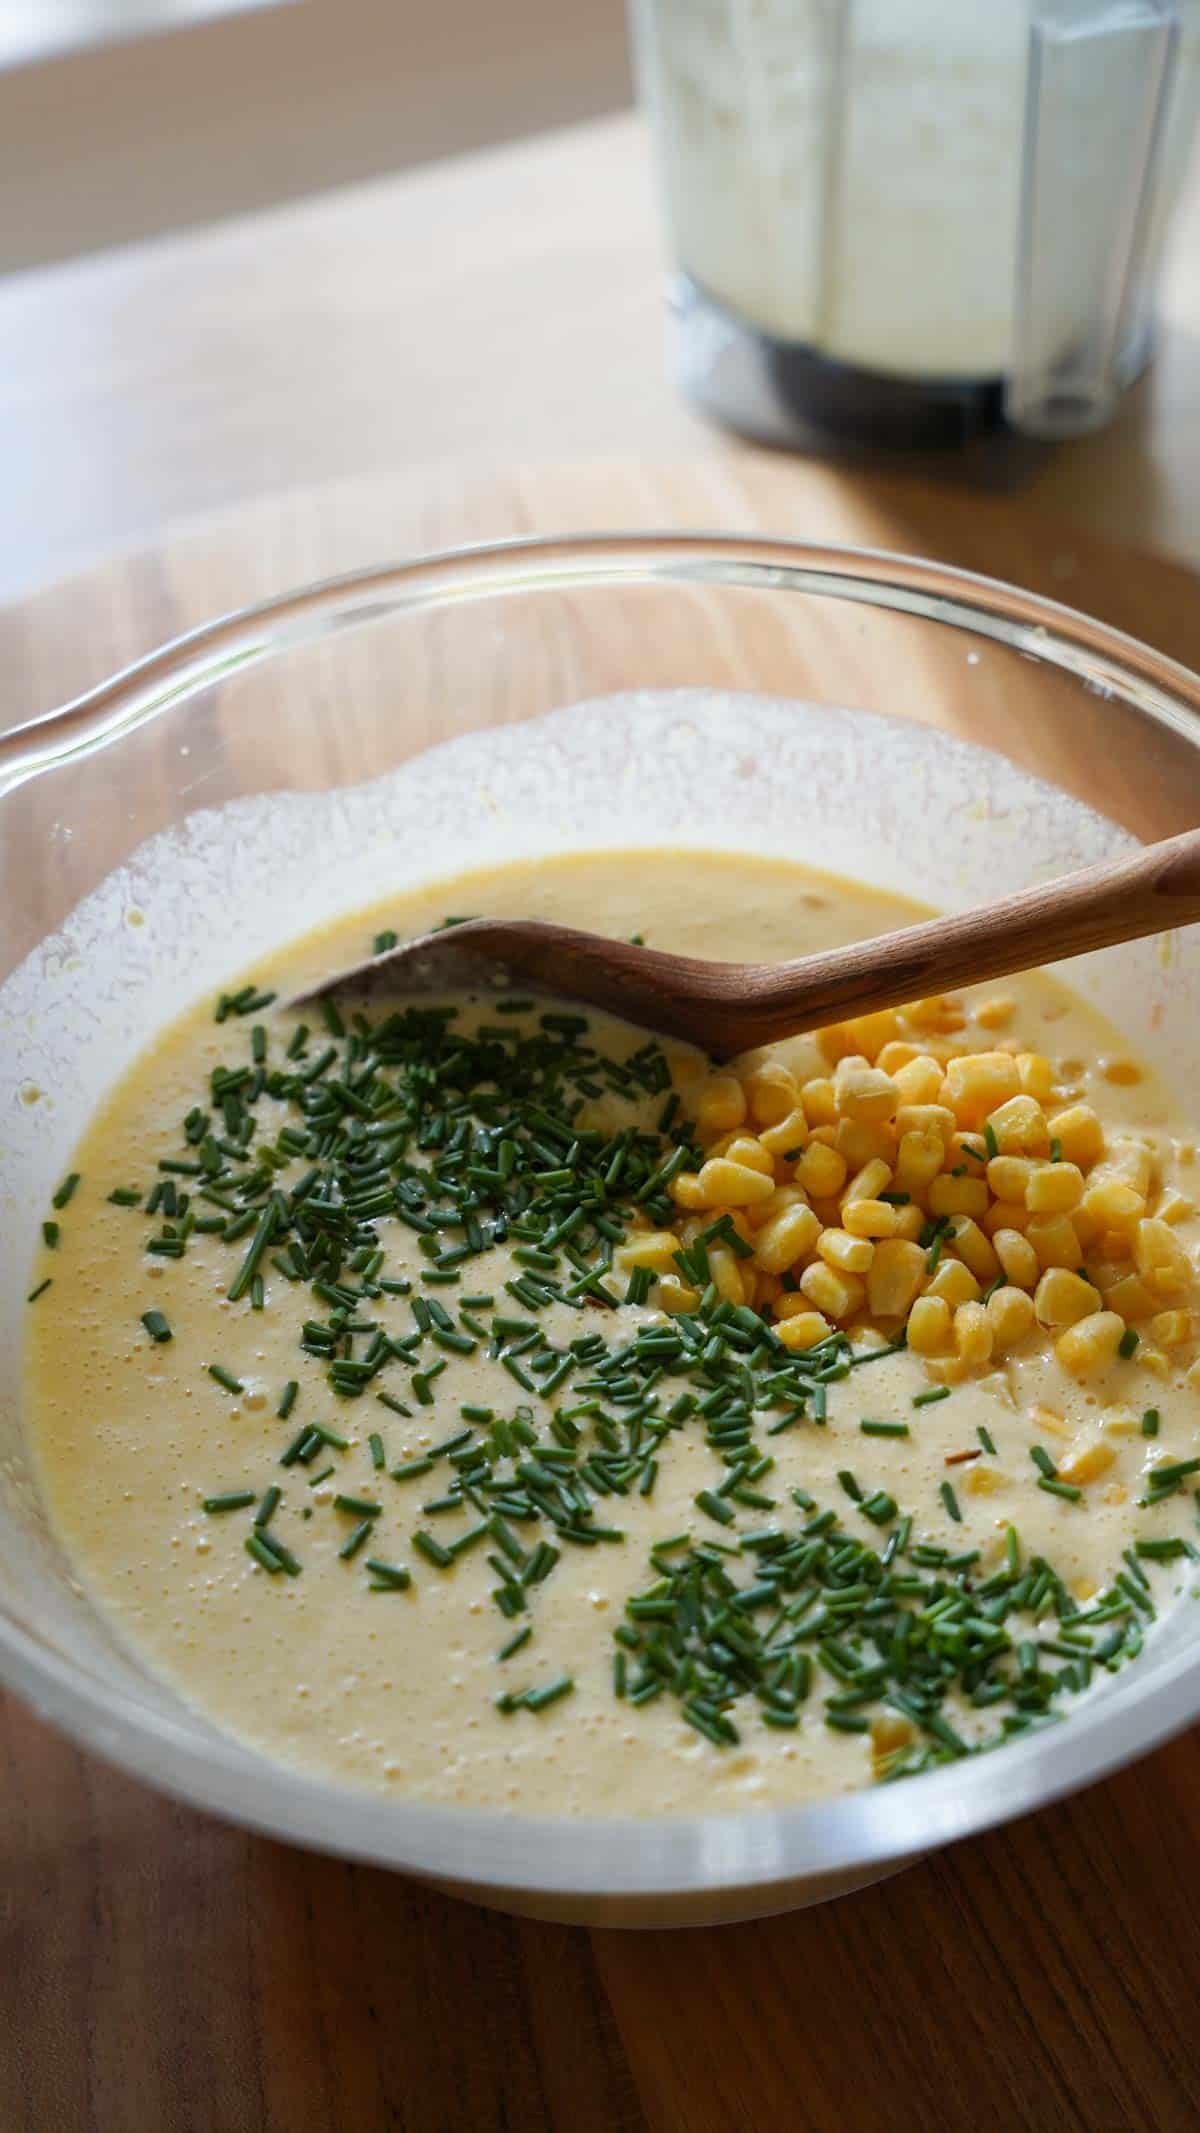 Corn pureed batter with corn kernels on top with chives